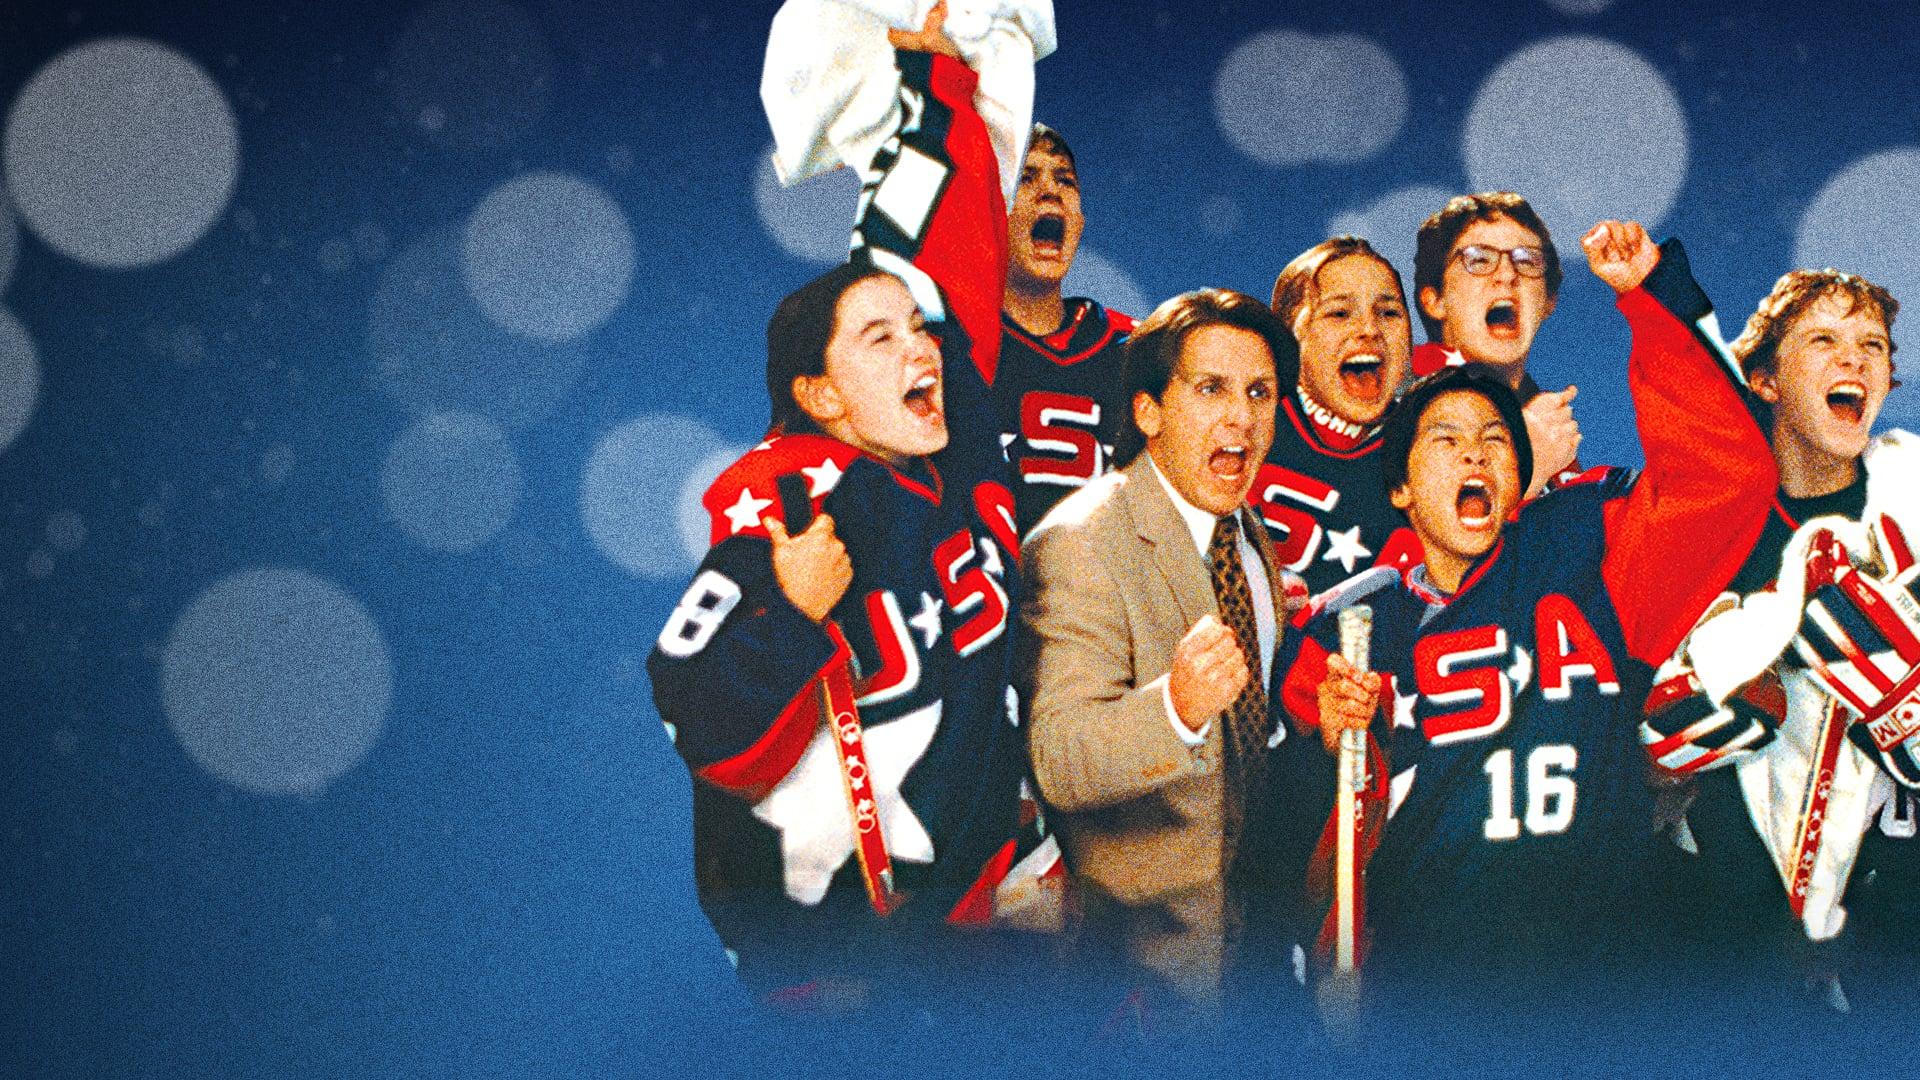 Backdrop Image for D2: The Mighty Ducks